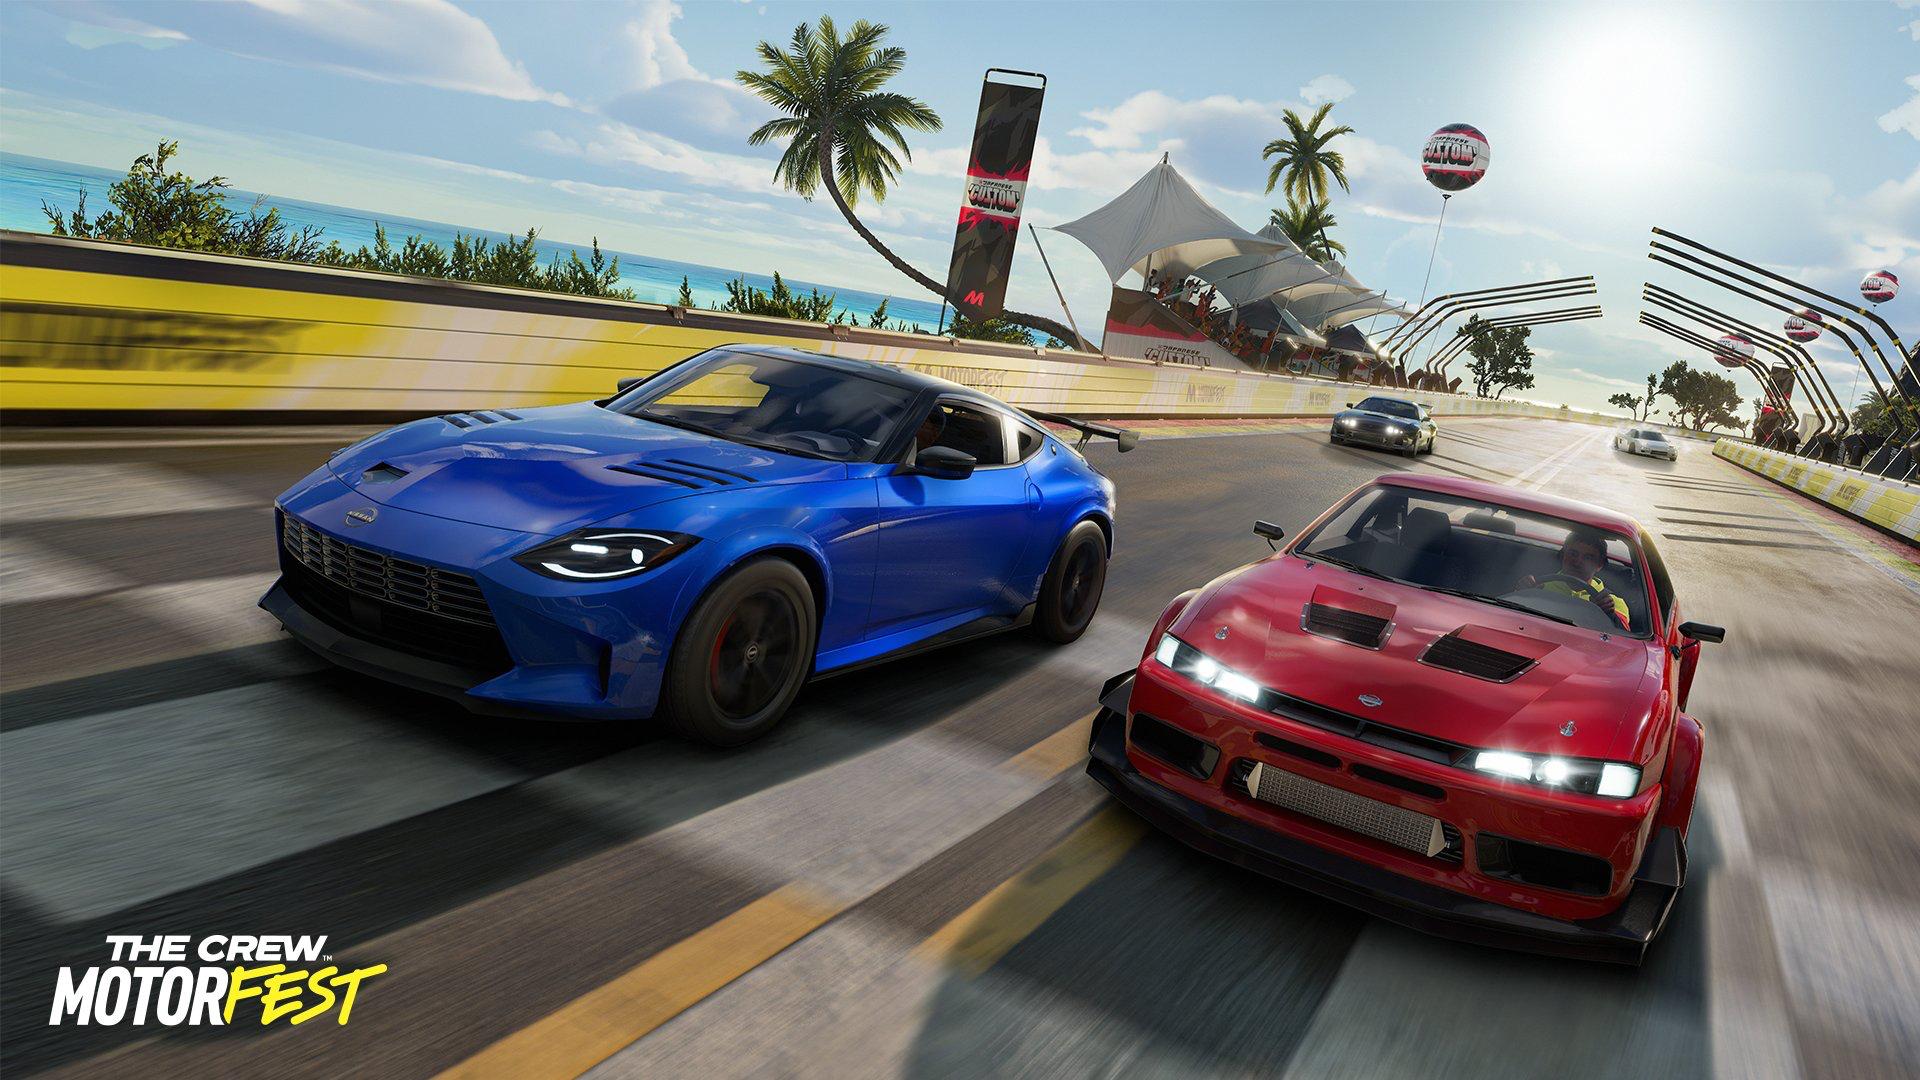 What is the street tier at the Crew Motorfest?